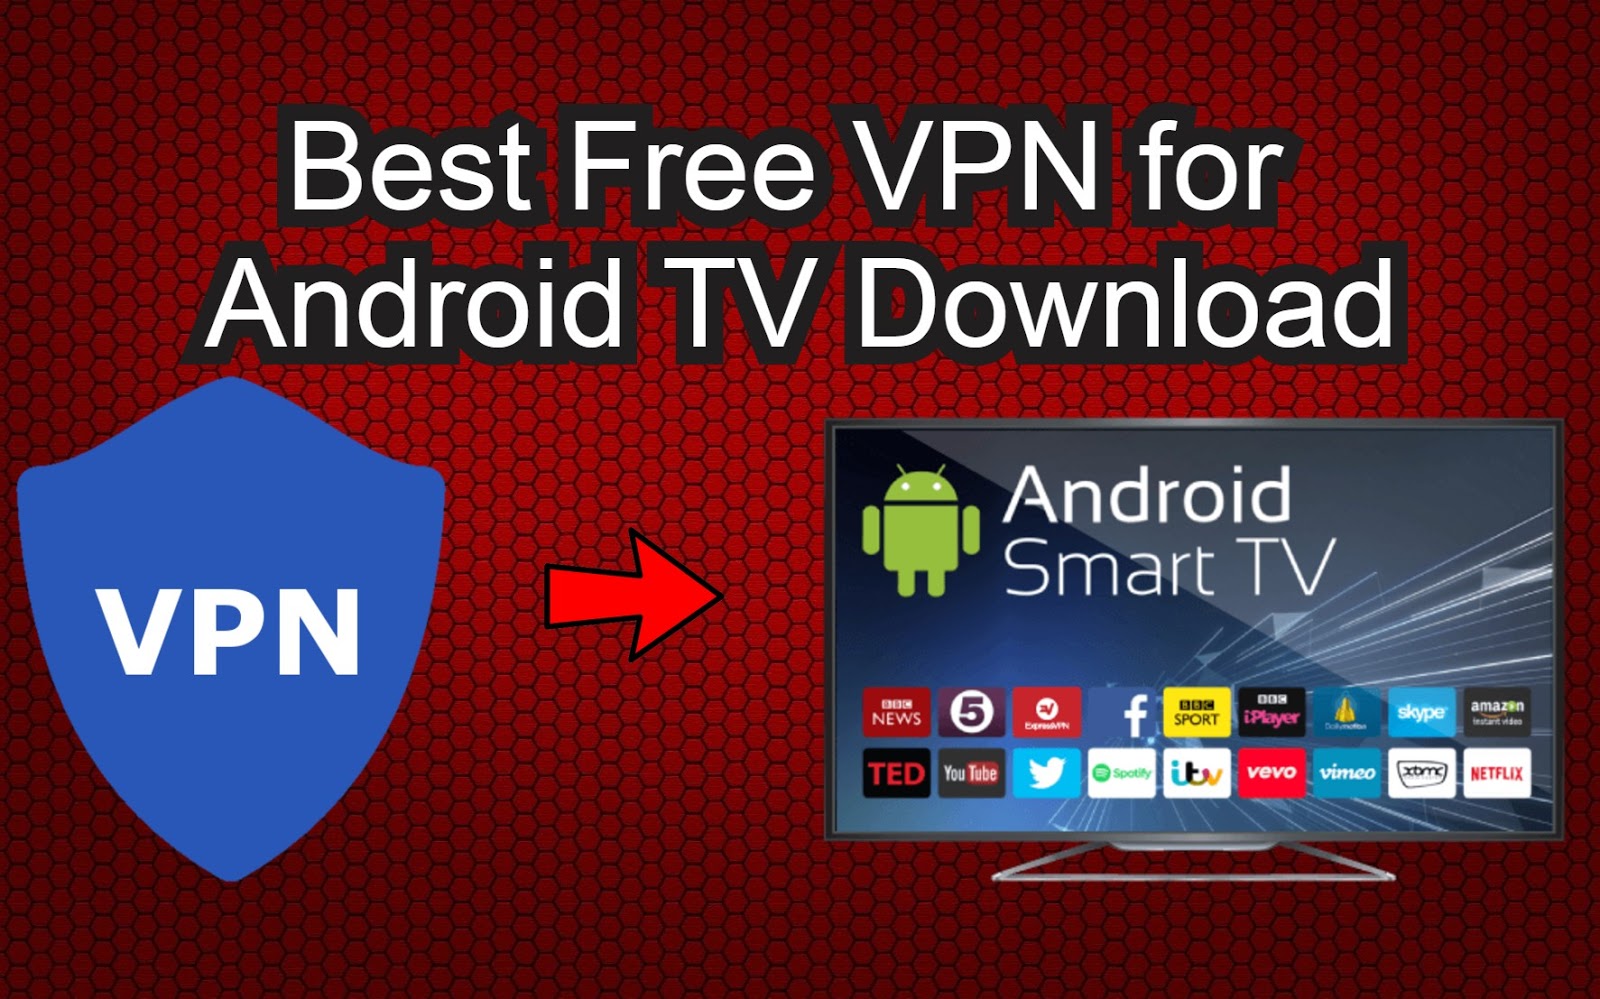 Best Free VPN for Android TV Box- 100% Free and Premium VPNs